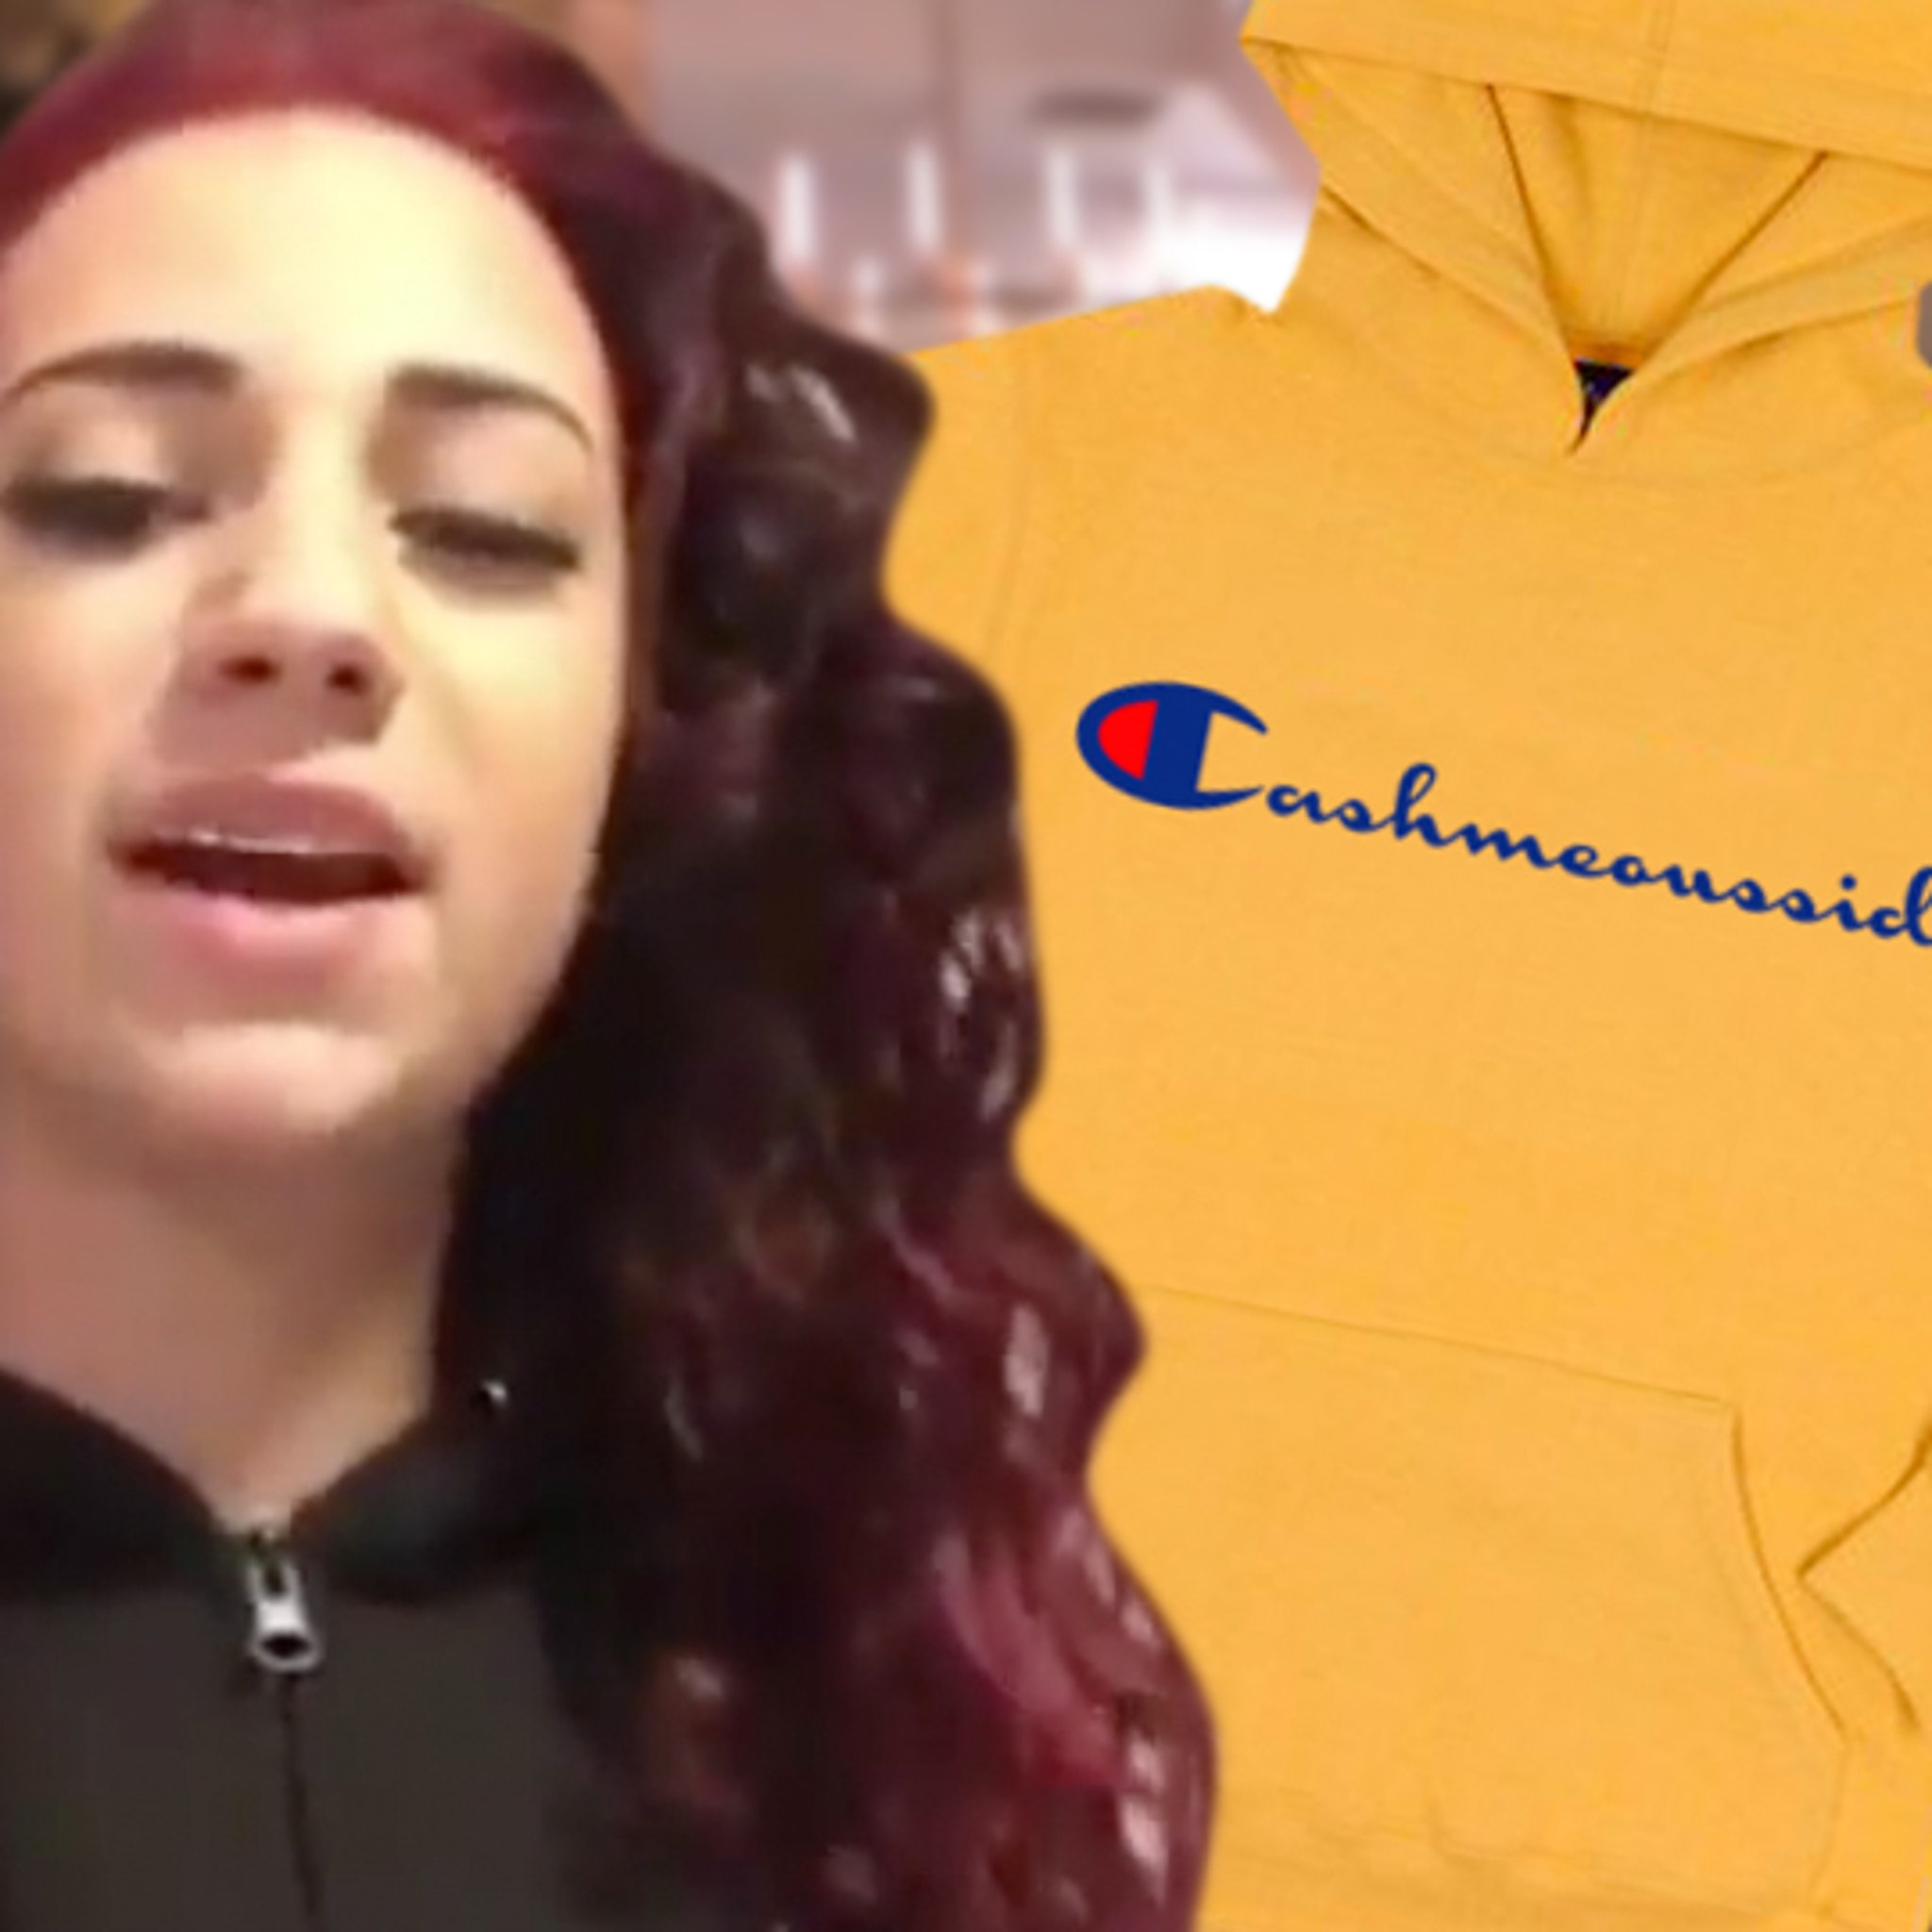 Hanesbrands 'Cash Me Ousside' Girl to Stop Their Champion Logo